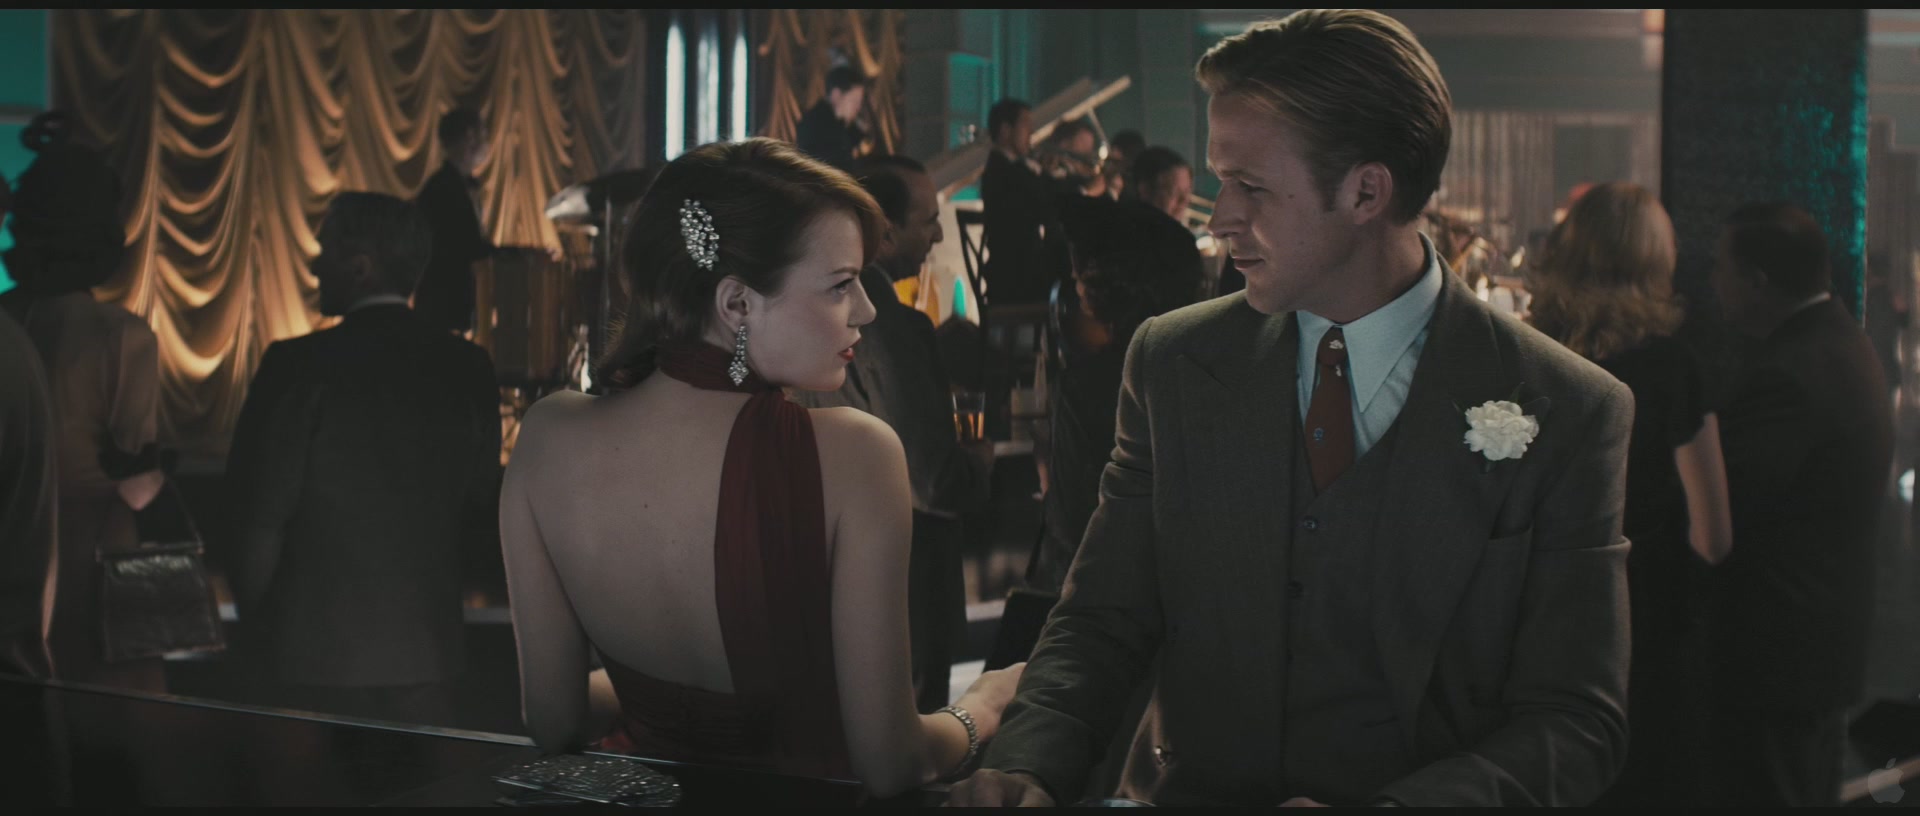 Movie Gangster Squad HD Wallpaper | Background Image